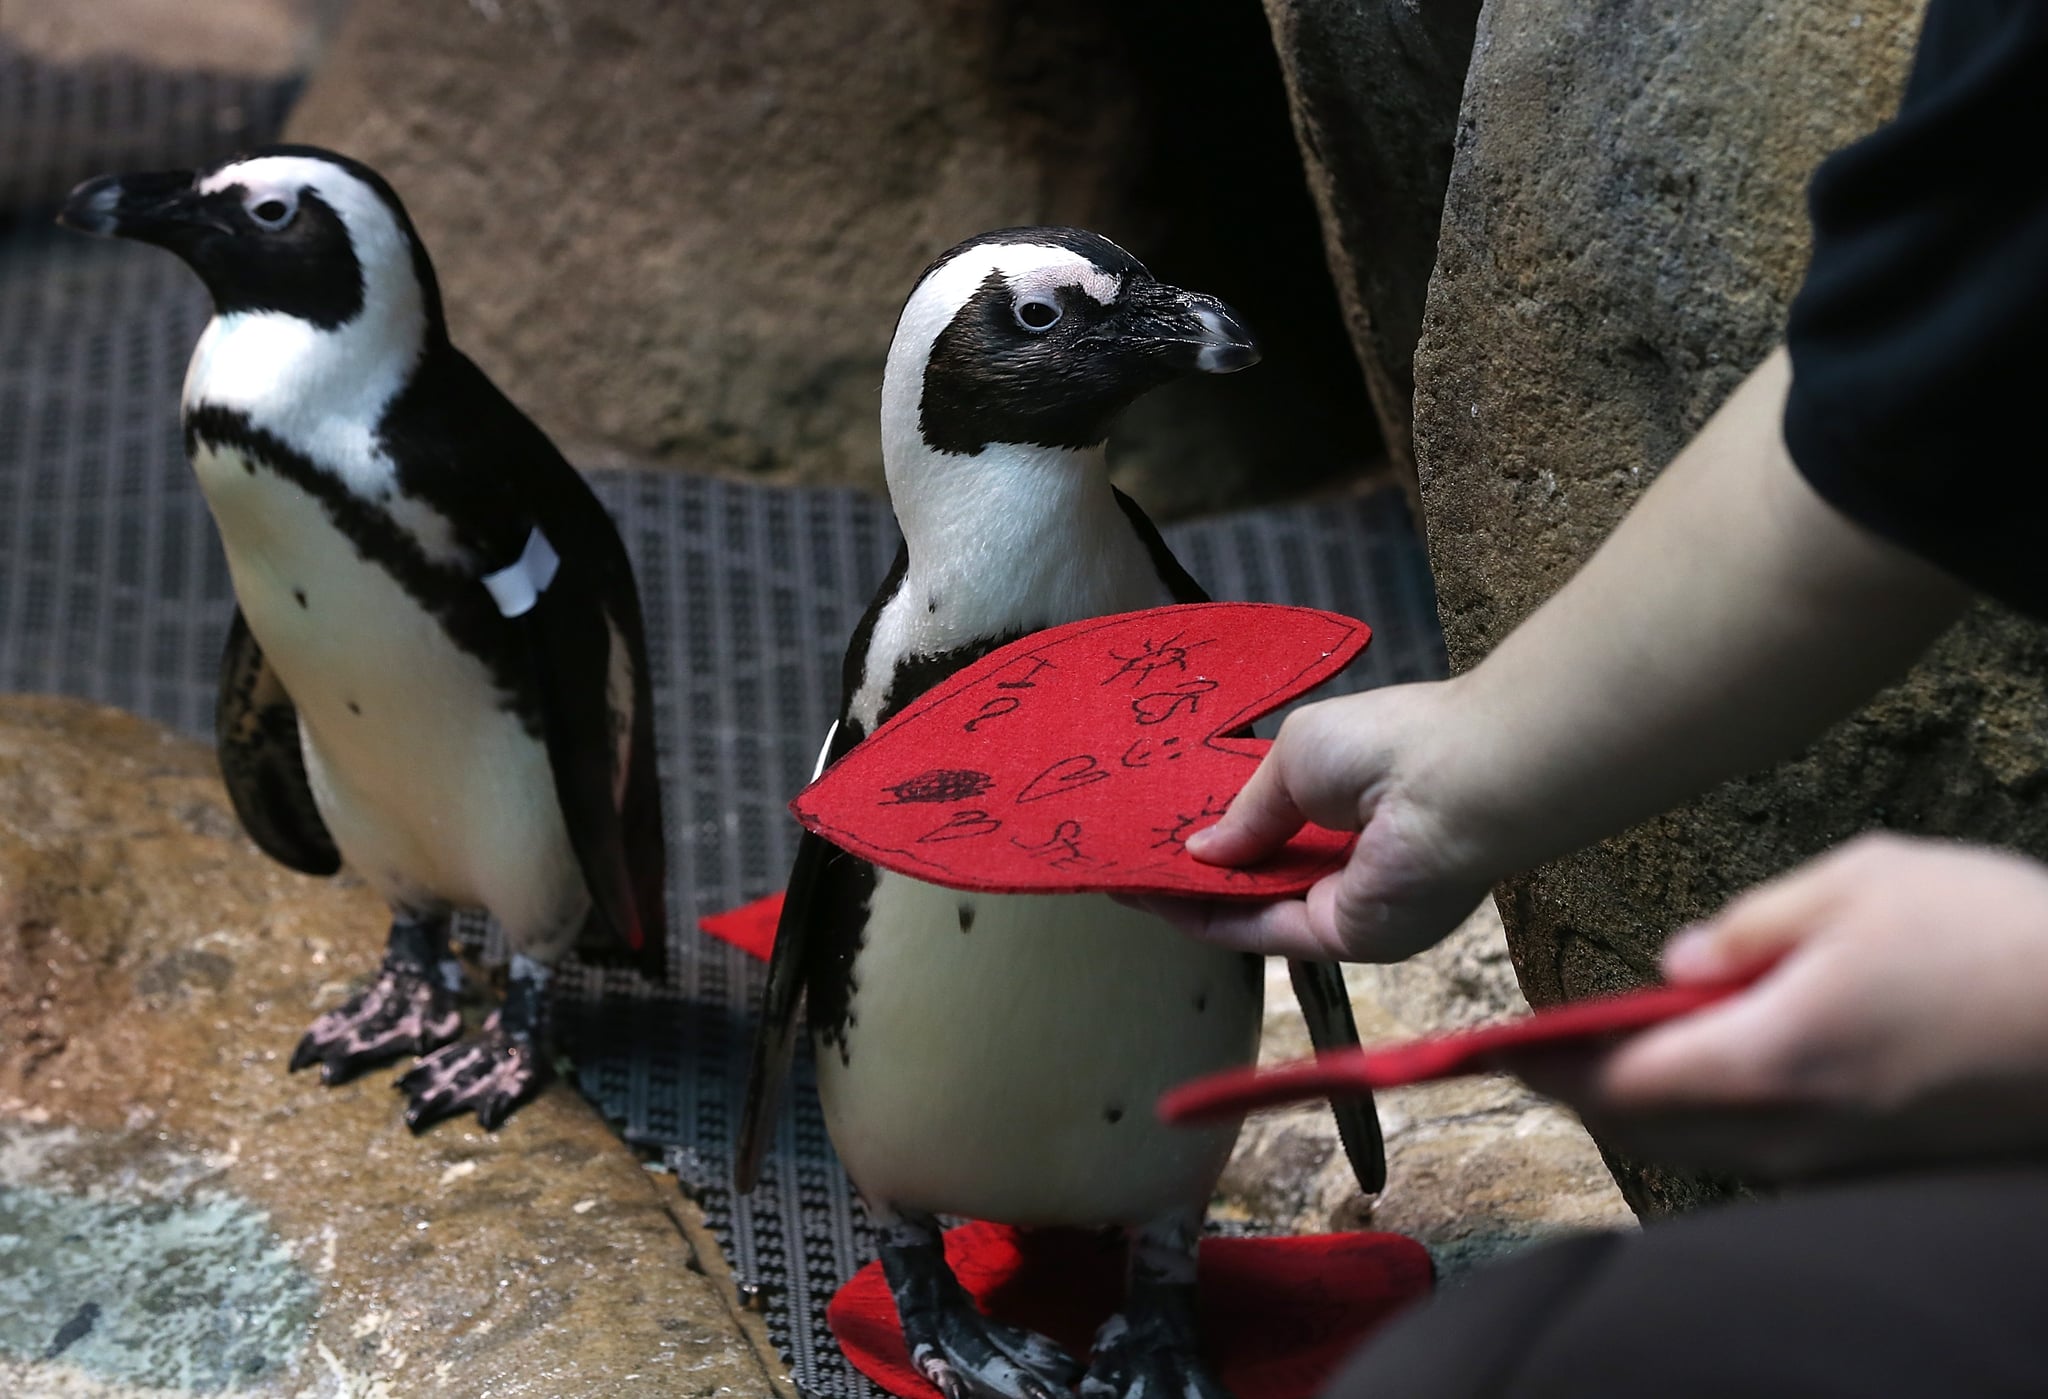 A biologist  gives an African Penguin a Valentine's Day card at the California Academy of Sciences in San Francisco, California.